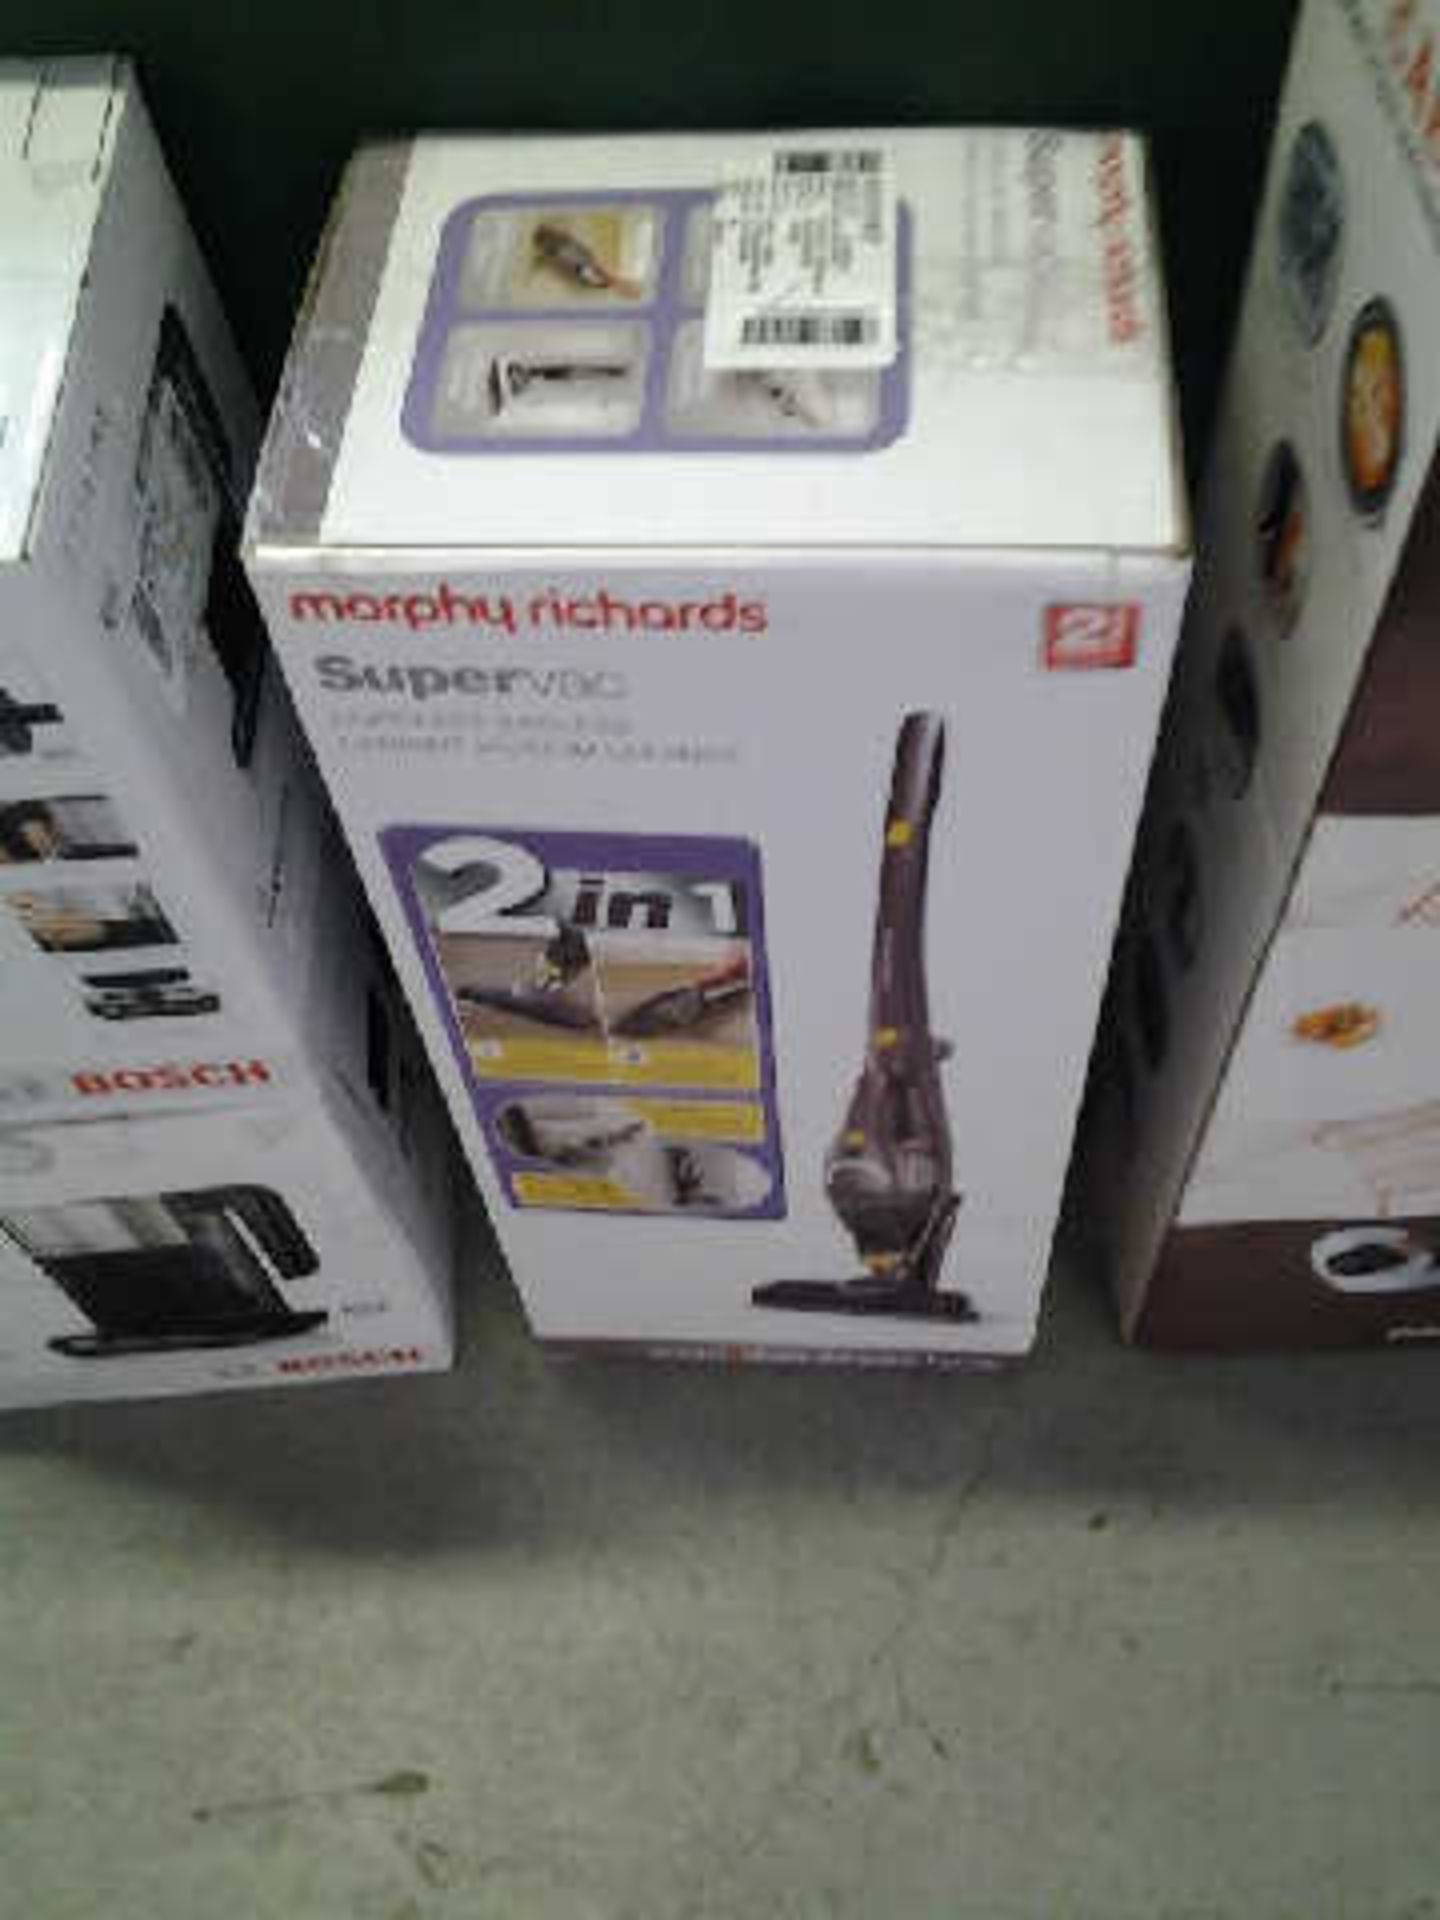 1 X BOXED MORPHY RICHARDS SUPERVAC VACUUM CLEANER - Image 2 of 3